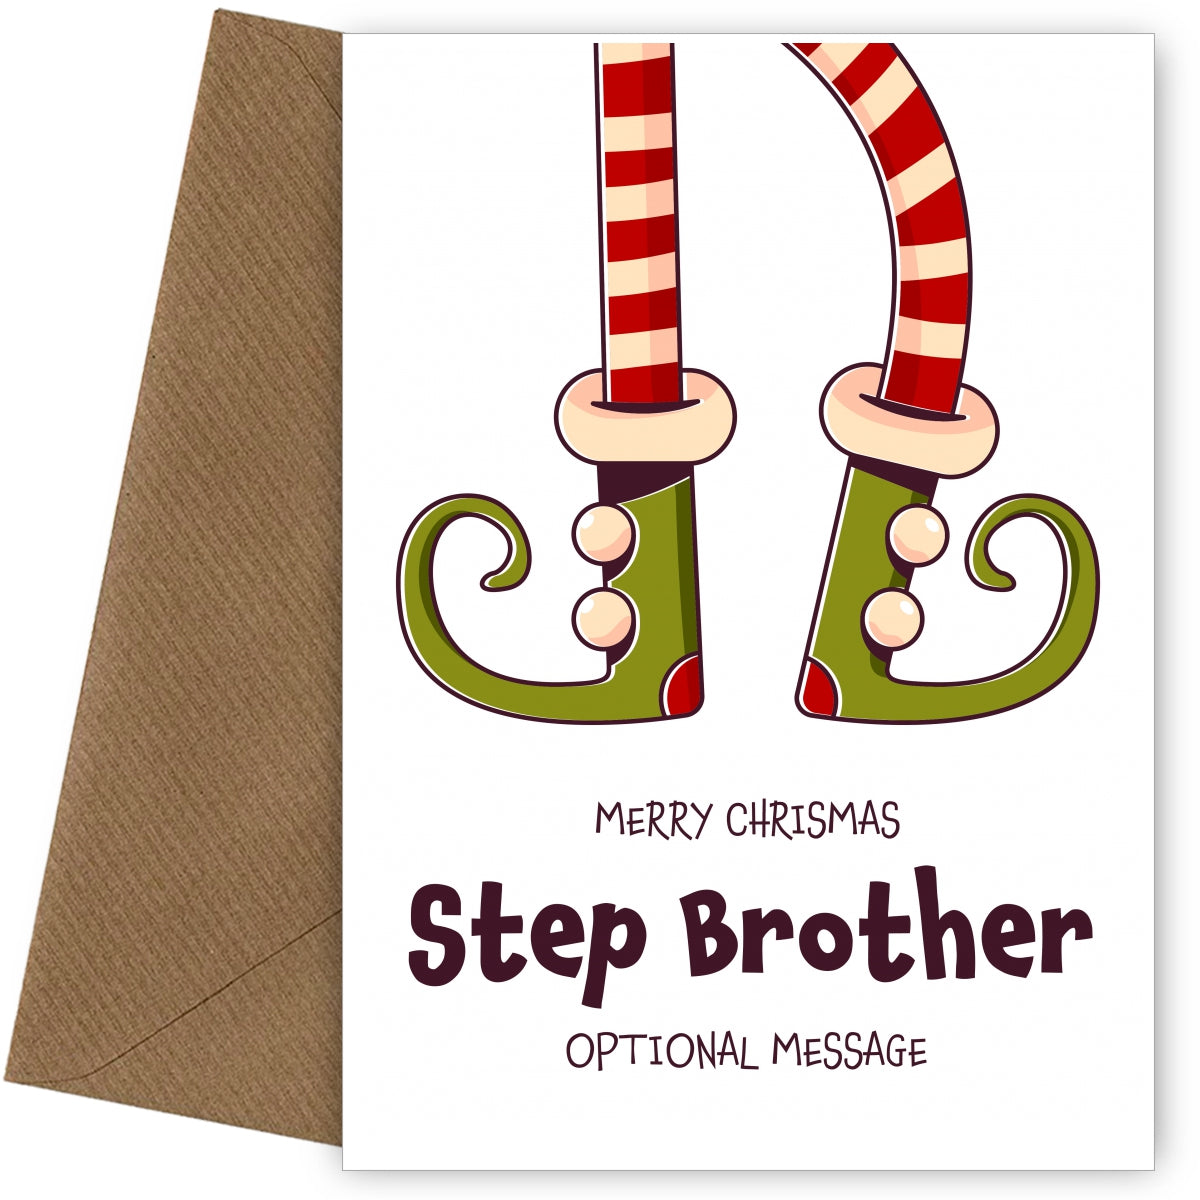 Cute Christmas Card for Step Brother - Elf Shoes